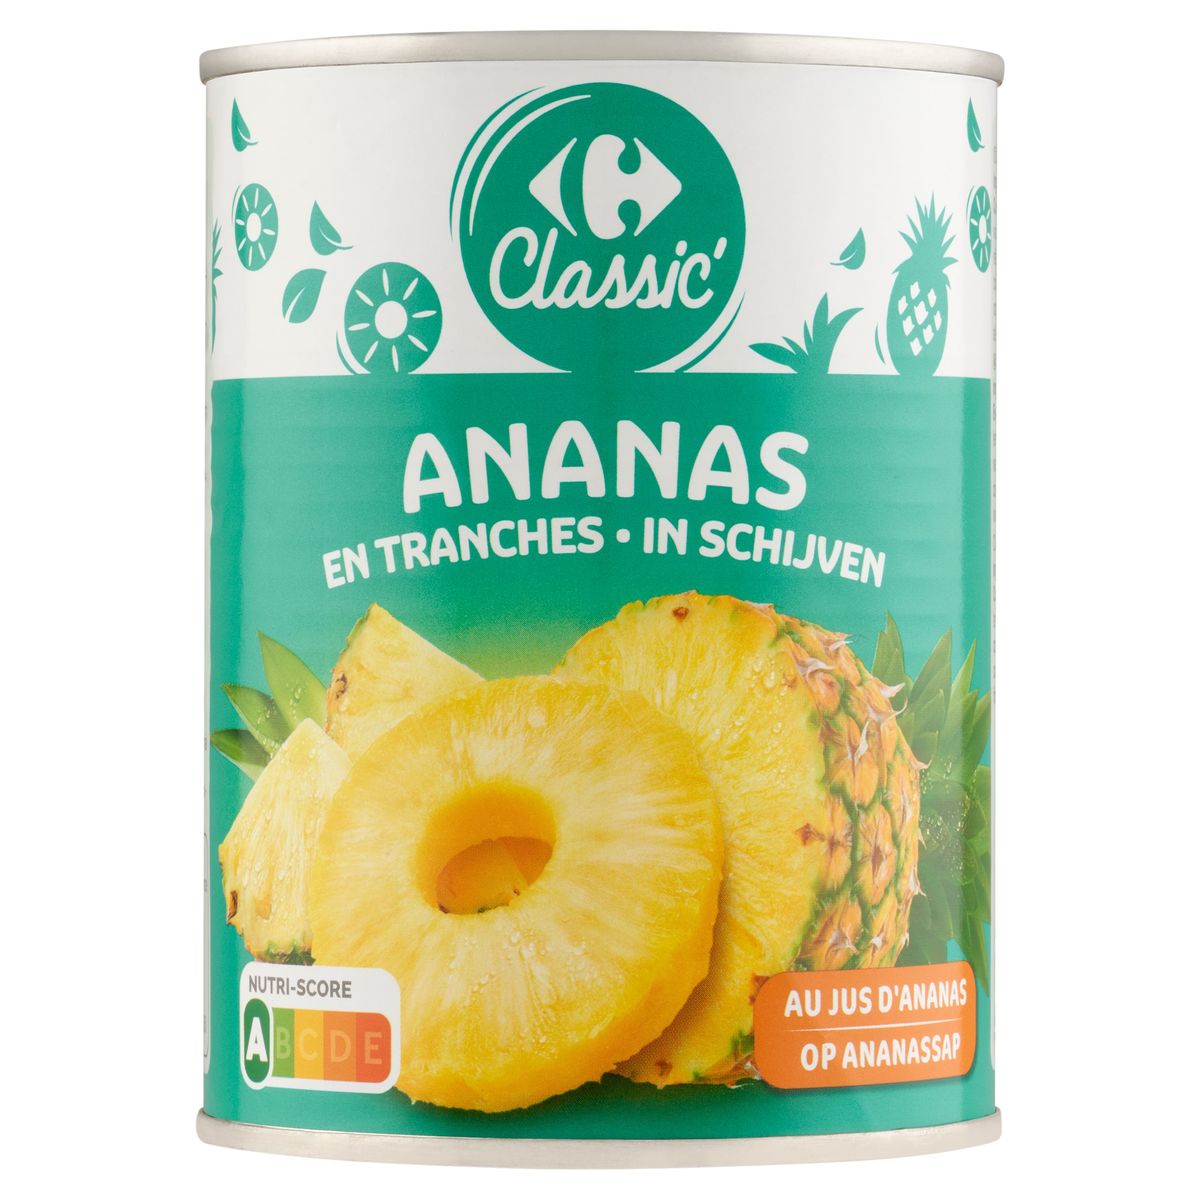 Carrefour Classic' Ananas en Tranches au Jus d'Ananas 565 g